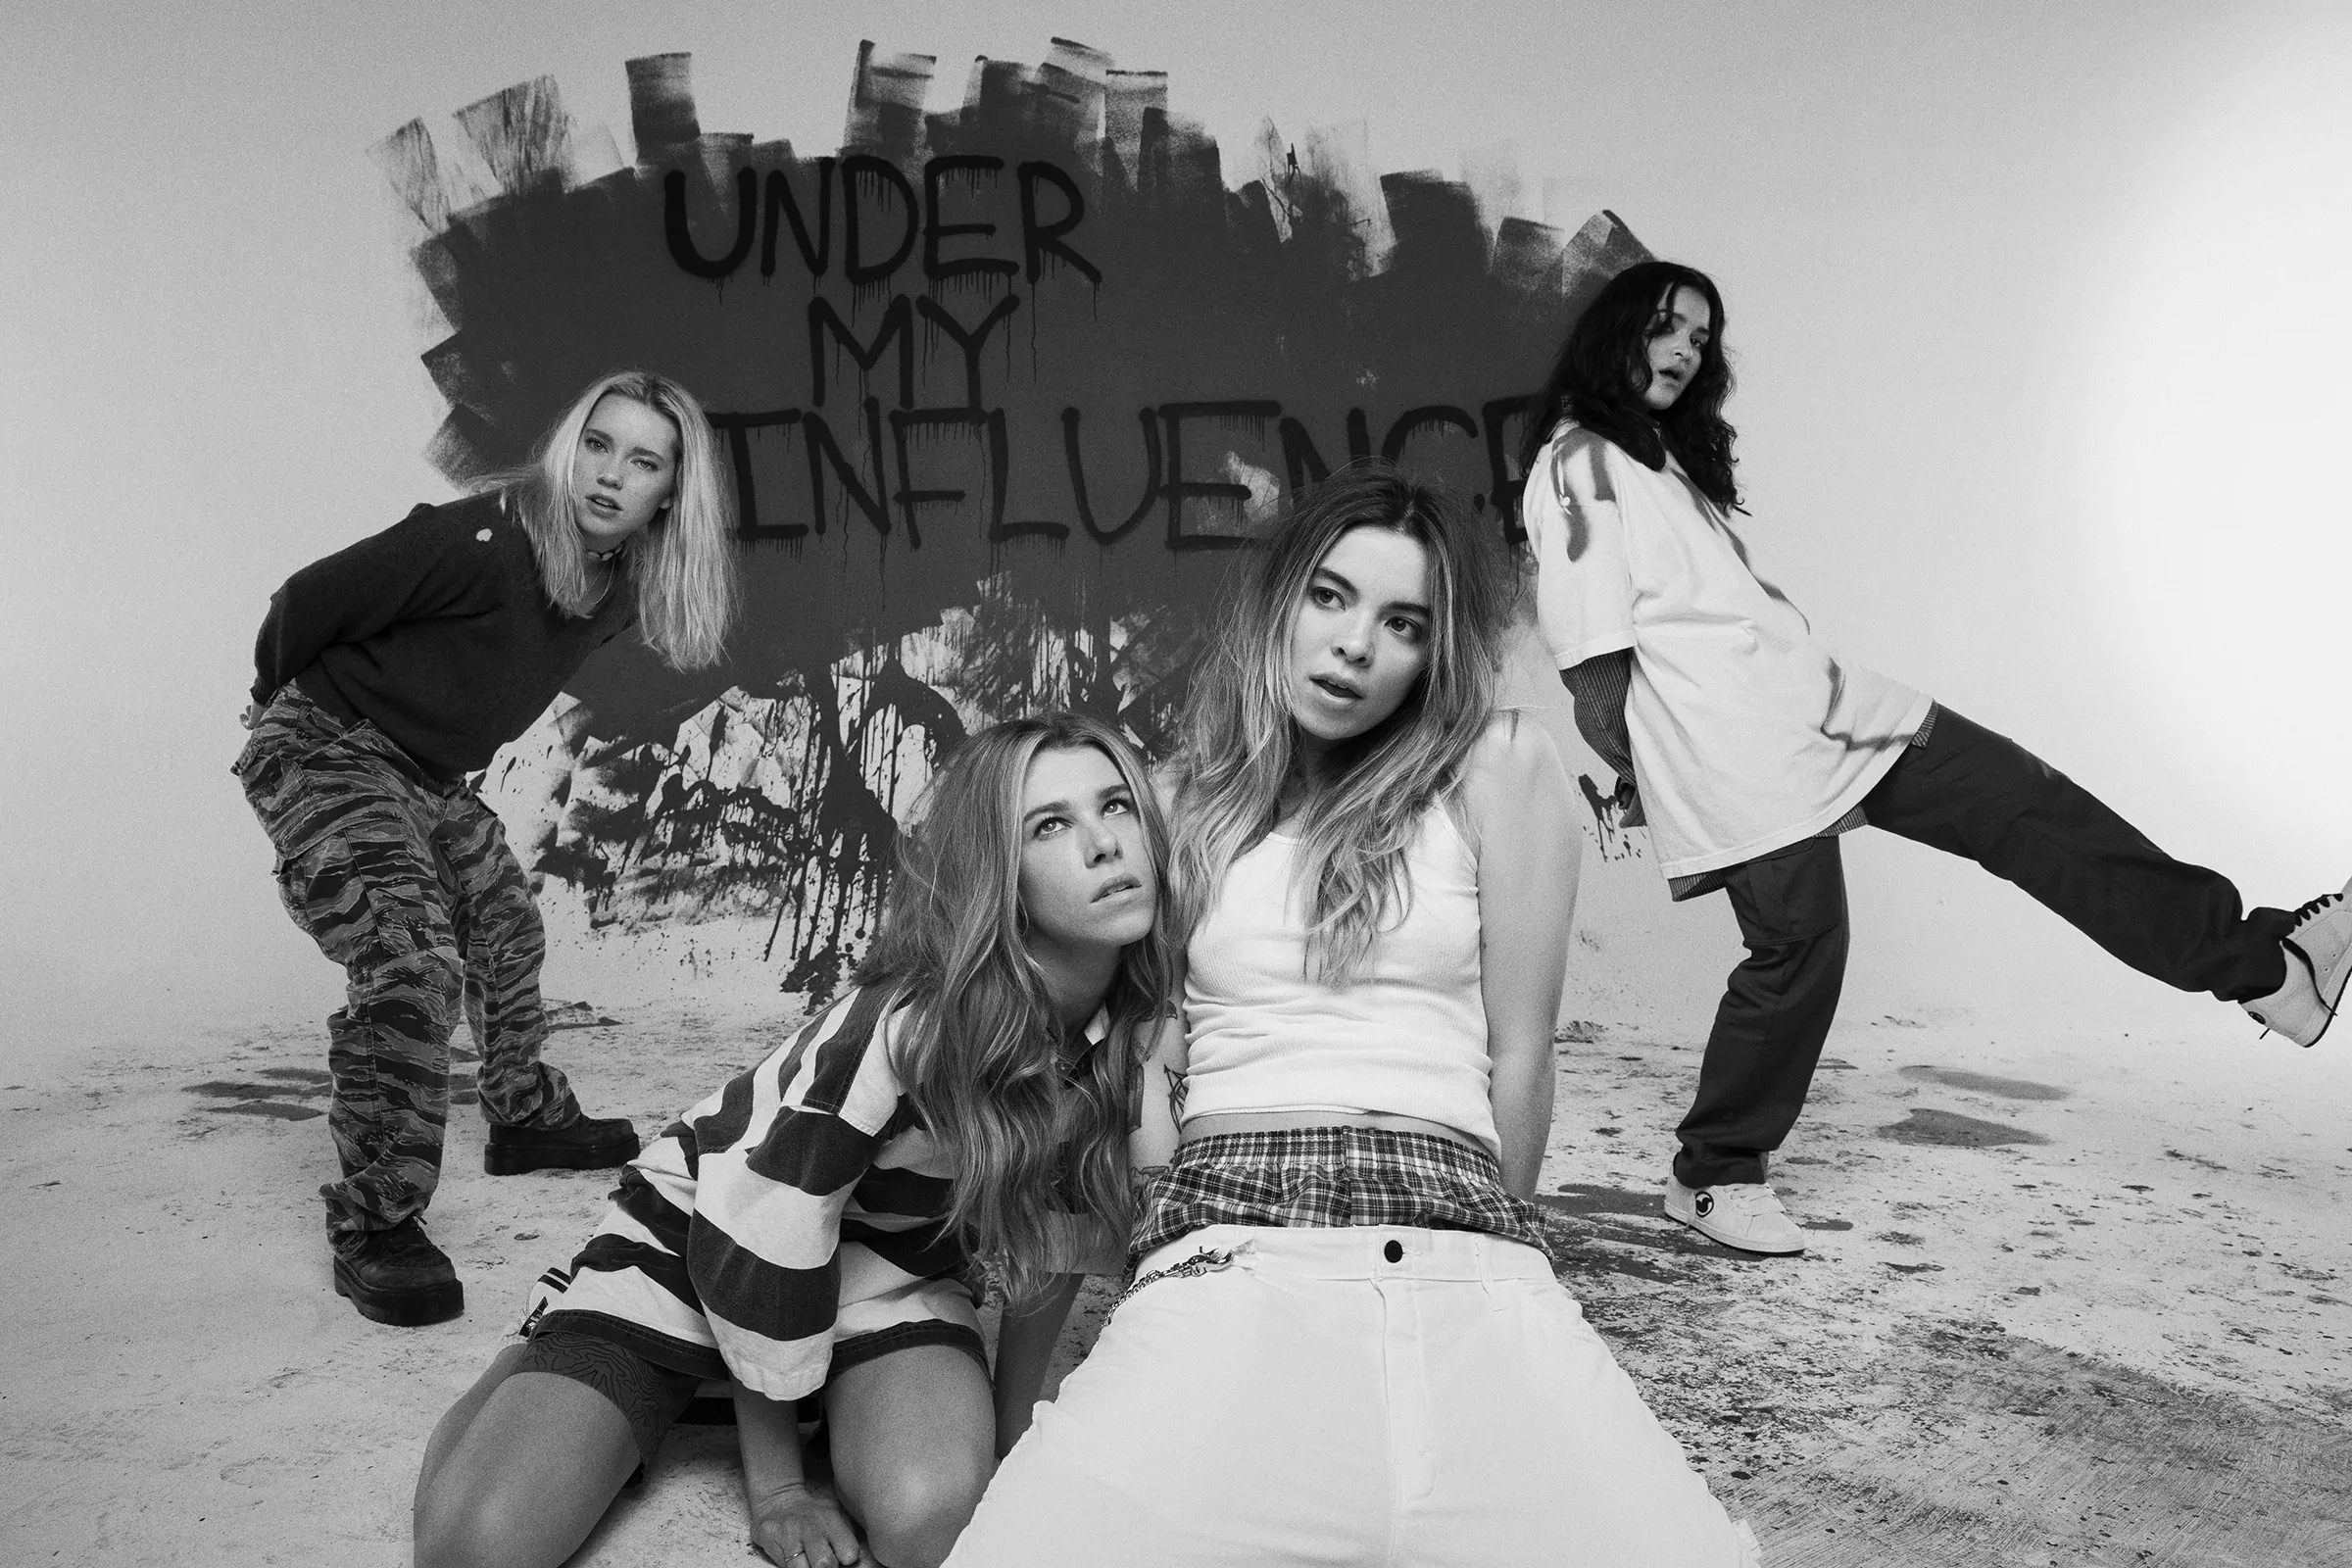 THE ACES announce sophomore album ‘Under My Influence’ – out 12th June